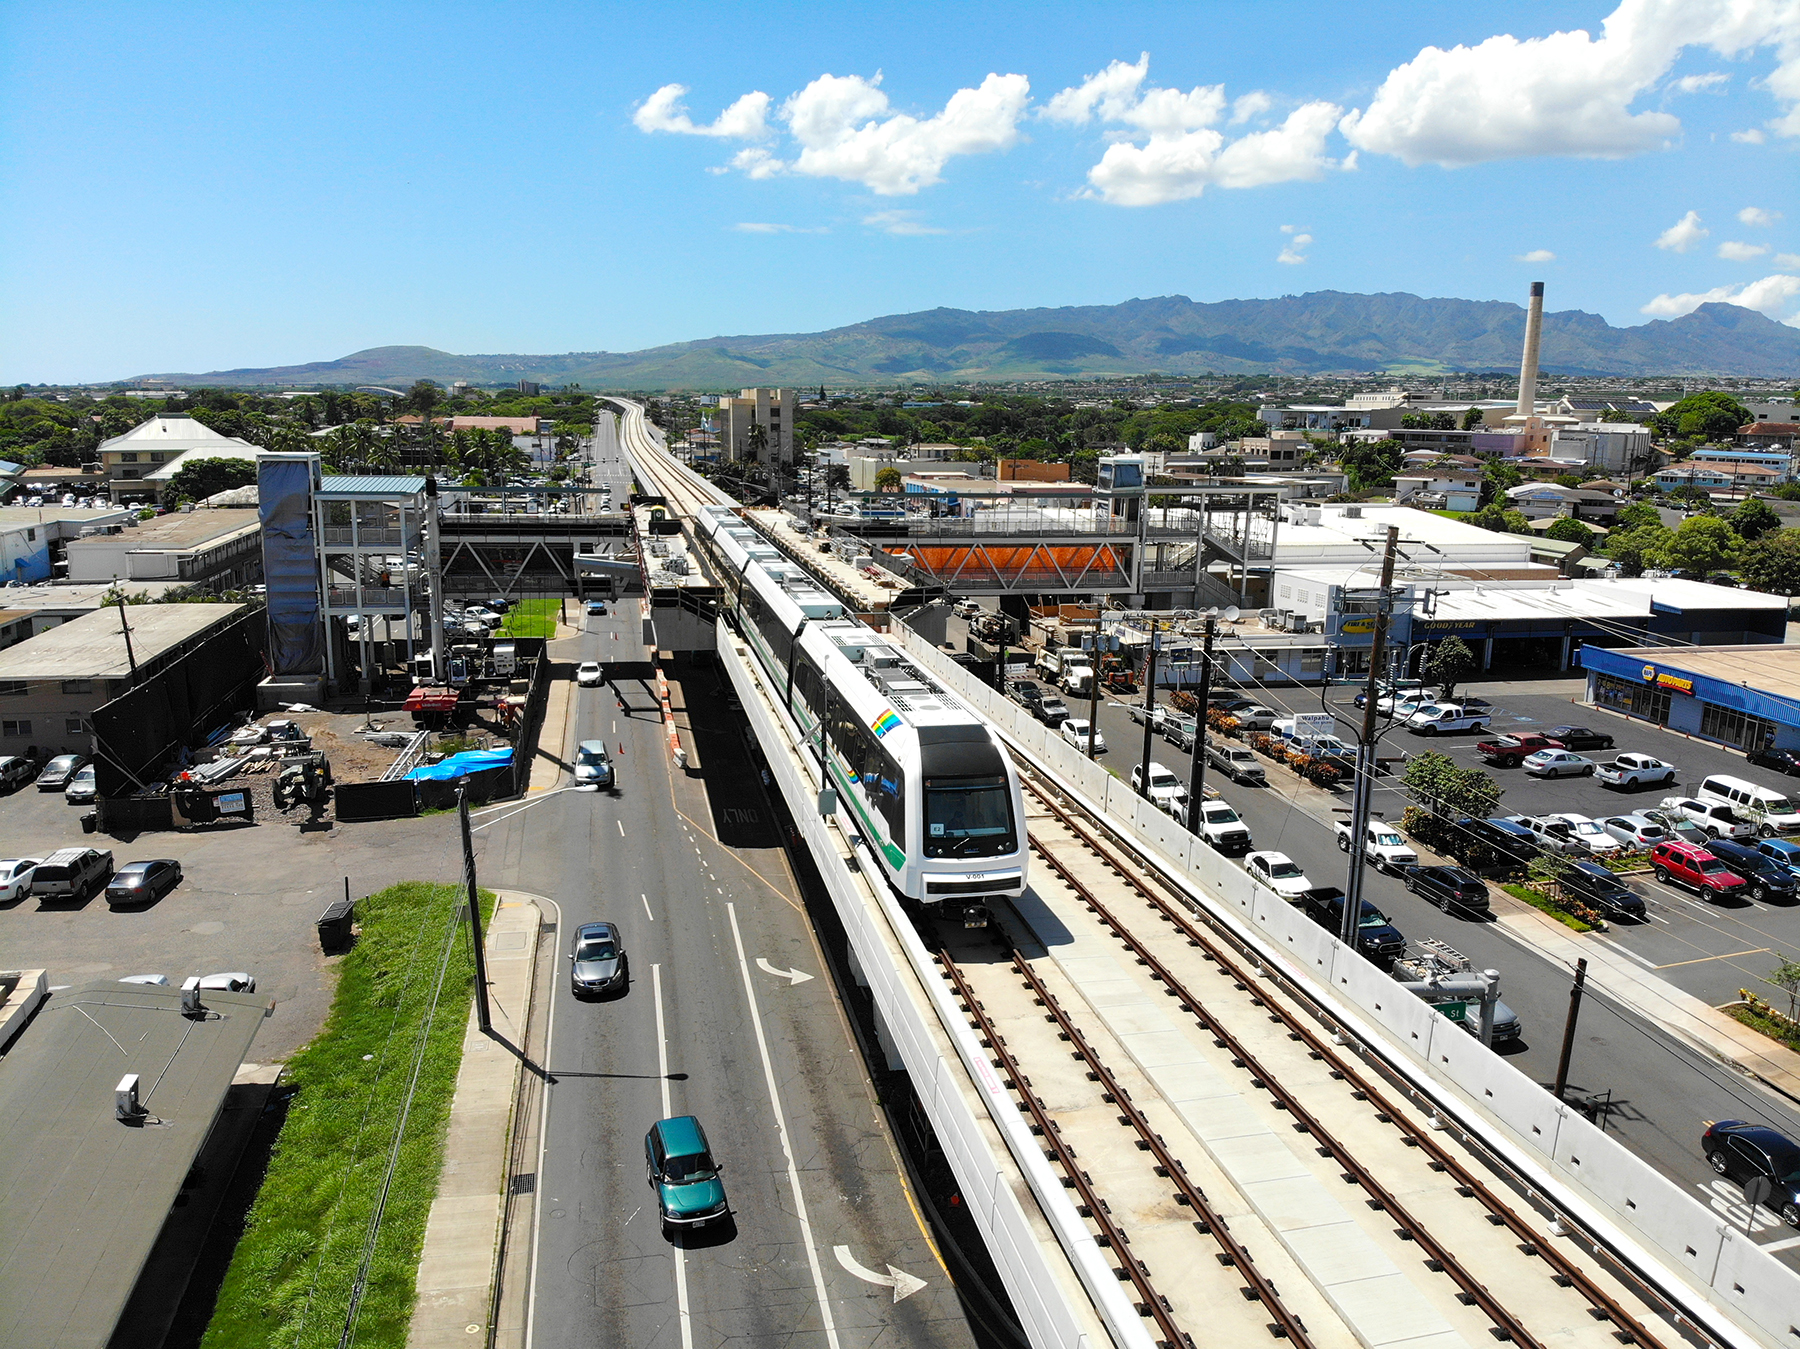 The elevated guideway measures approximately 30 ft wide to accommodate two sets of tracks. Shown here, a train stops at the Pouhala/Waipahu Transit Center. (Image courtesy of HART)